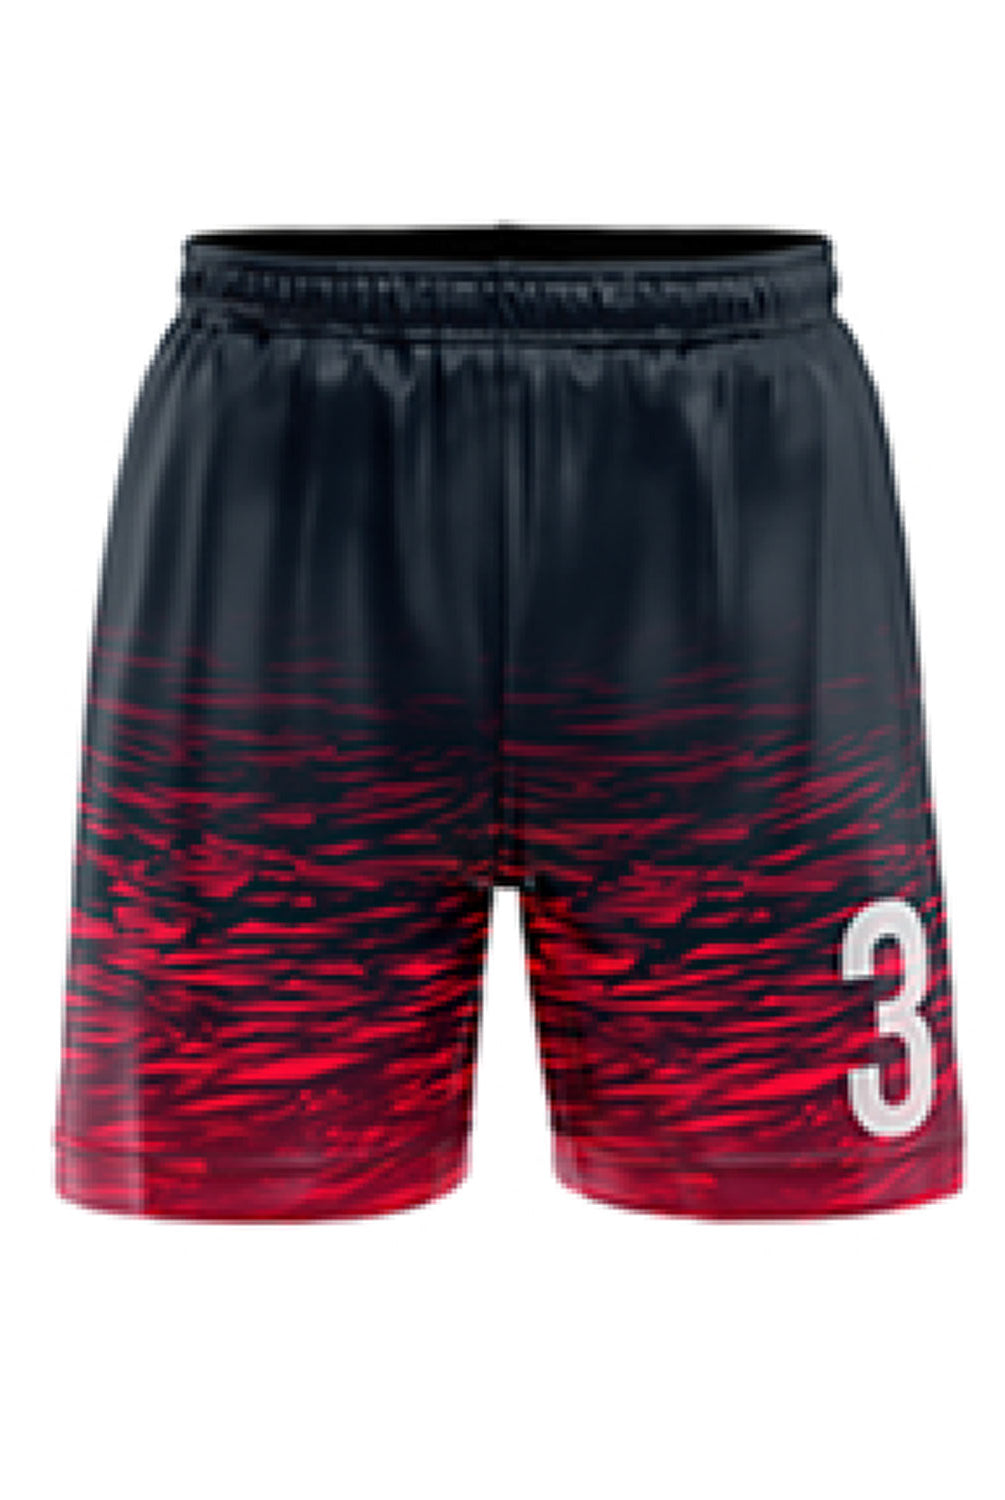 a custom pair of shorts sample black and red